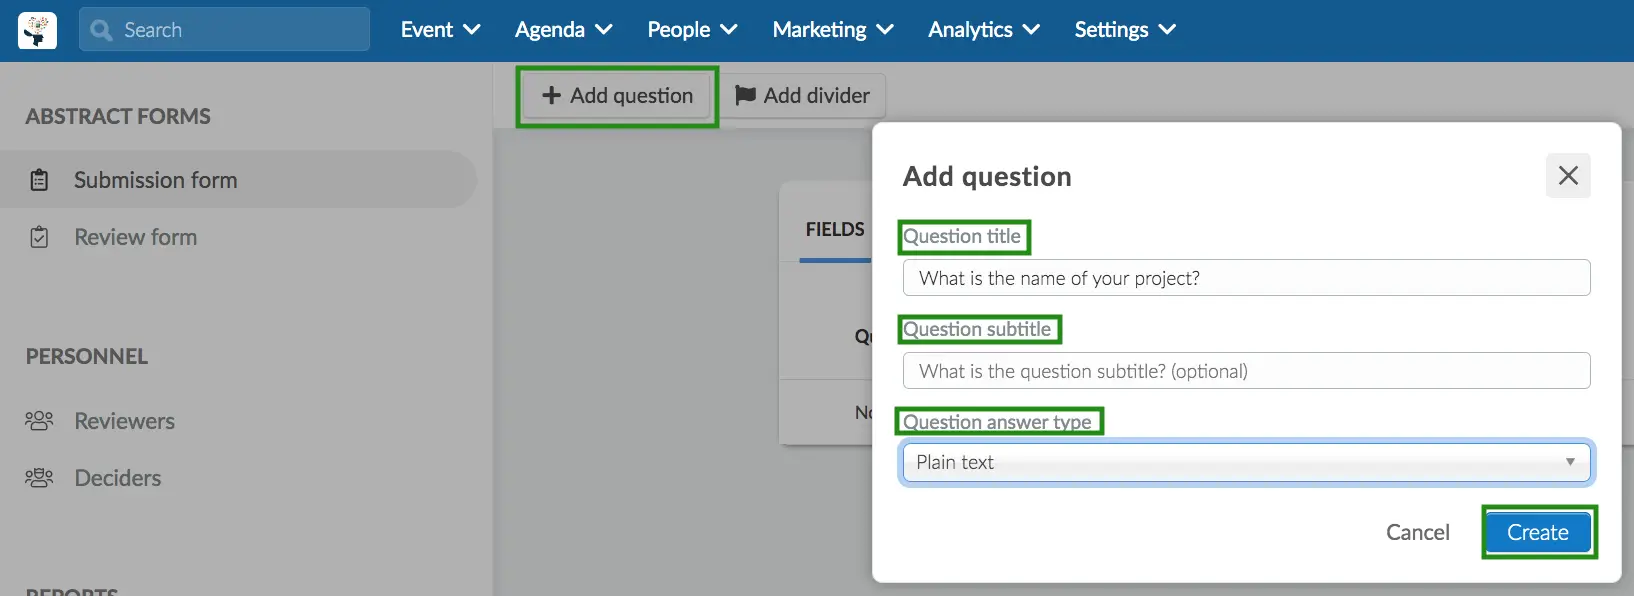 Image showing how to add a question